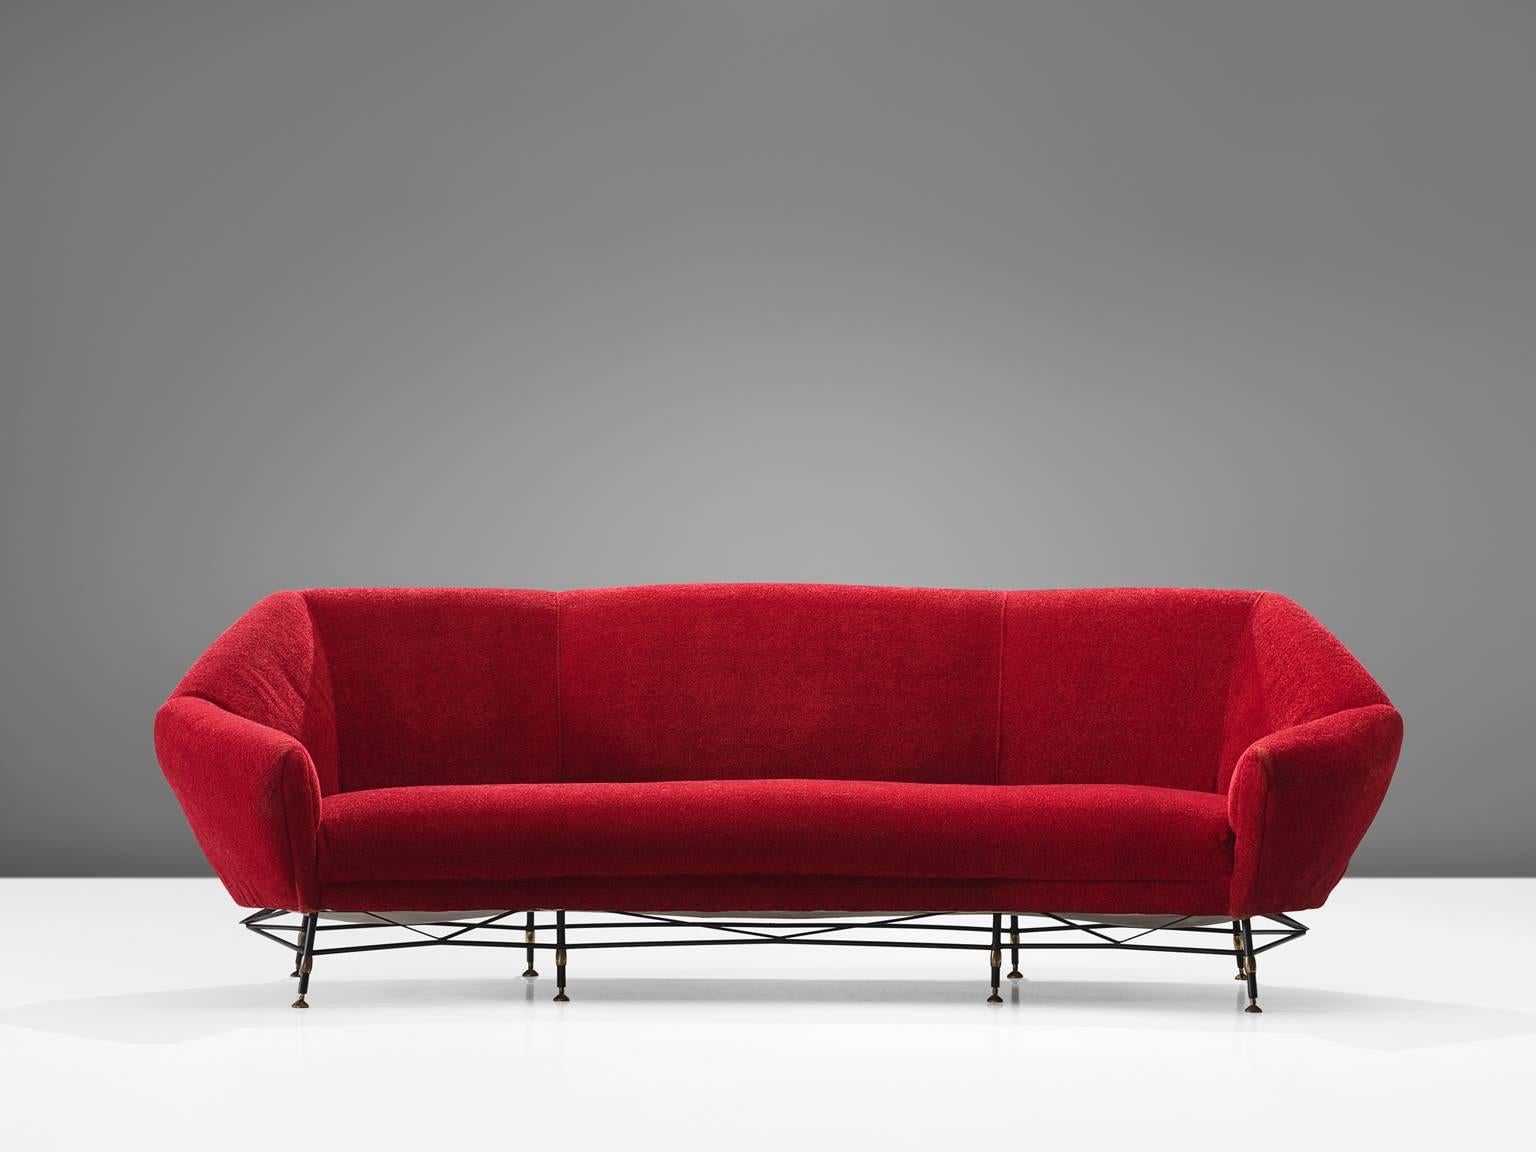 Sofa, red fabric and metal, Italy, 1950s.

This is Italian sofa is upholstered with a bright red fabric. Designed and made in Italy in the style of Augusto Bozzi. Elegant organic shaped settee in red upholstery, made with nicely shaped black painted